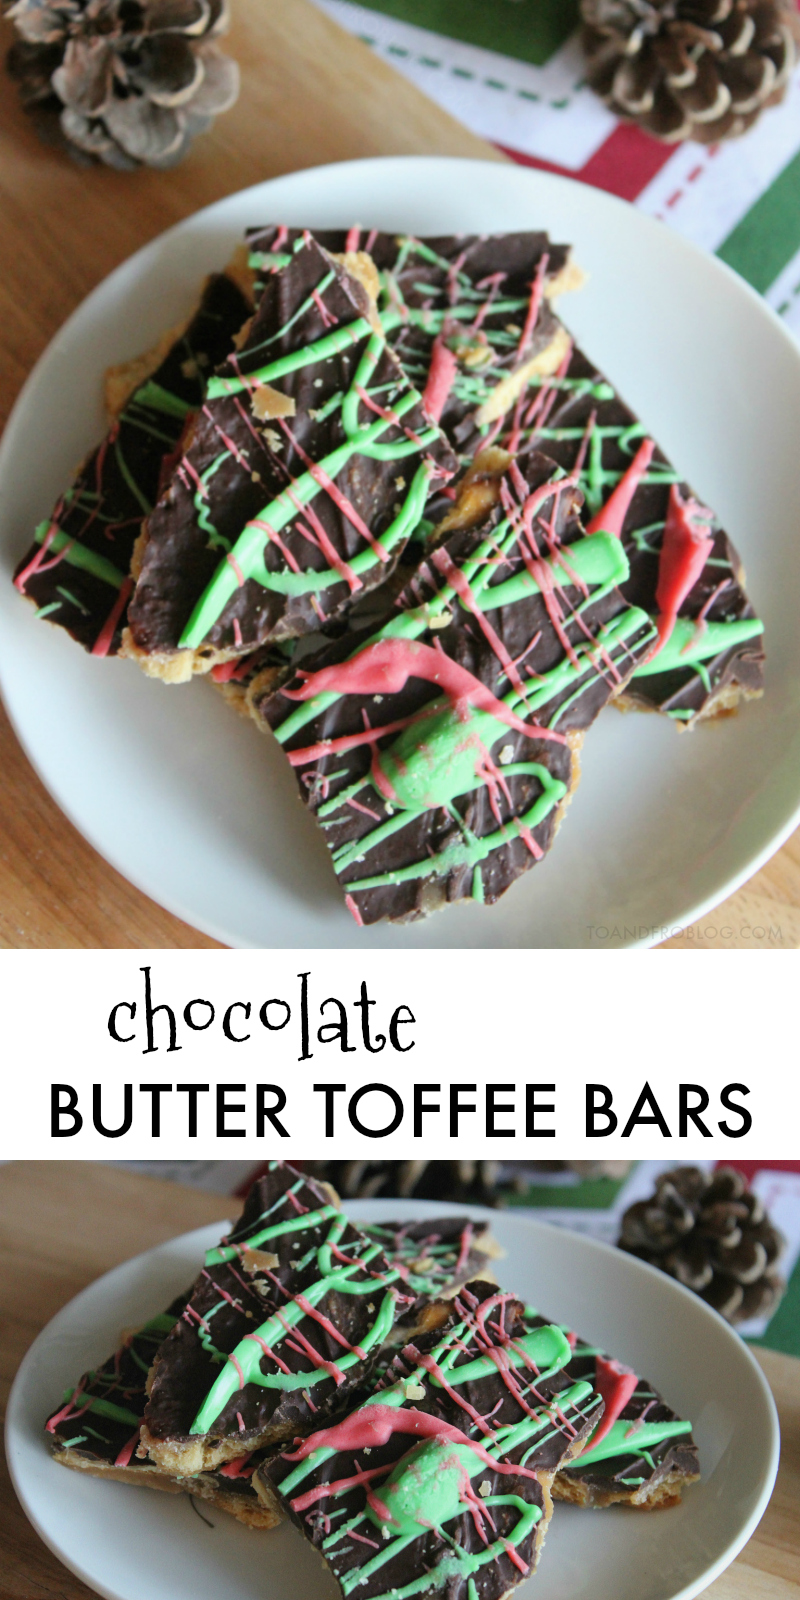 Chocolate Butter Toffee Bars Recipe